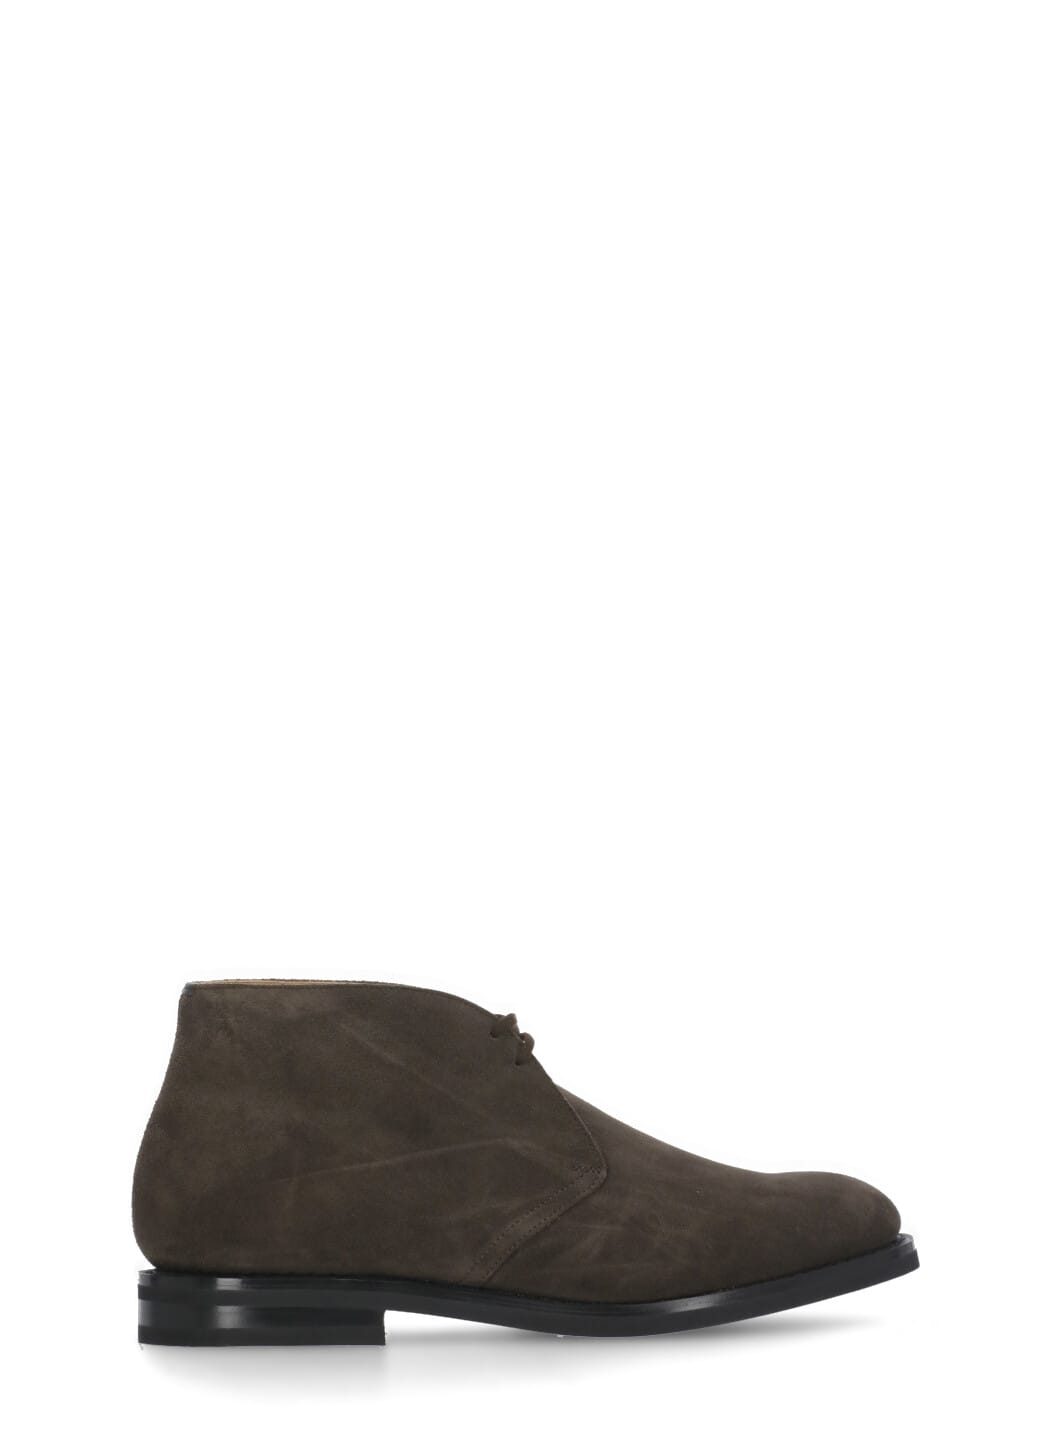 Ryder - Suede Leather Ankle Boot